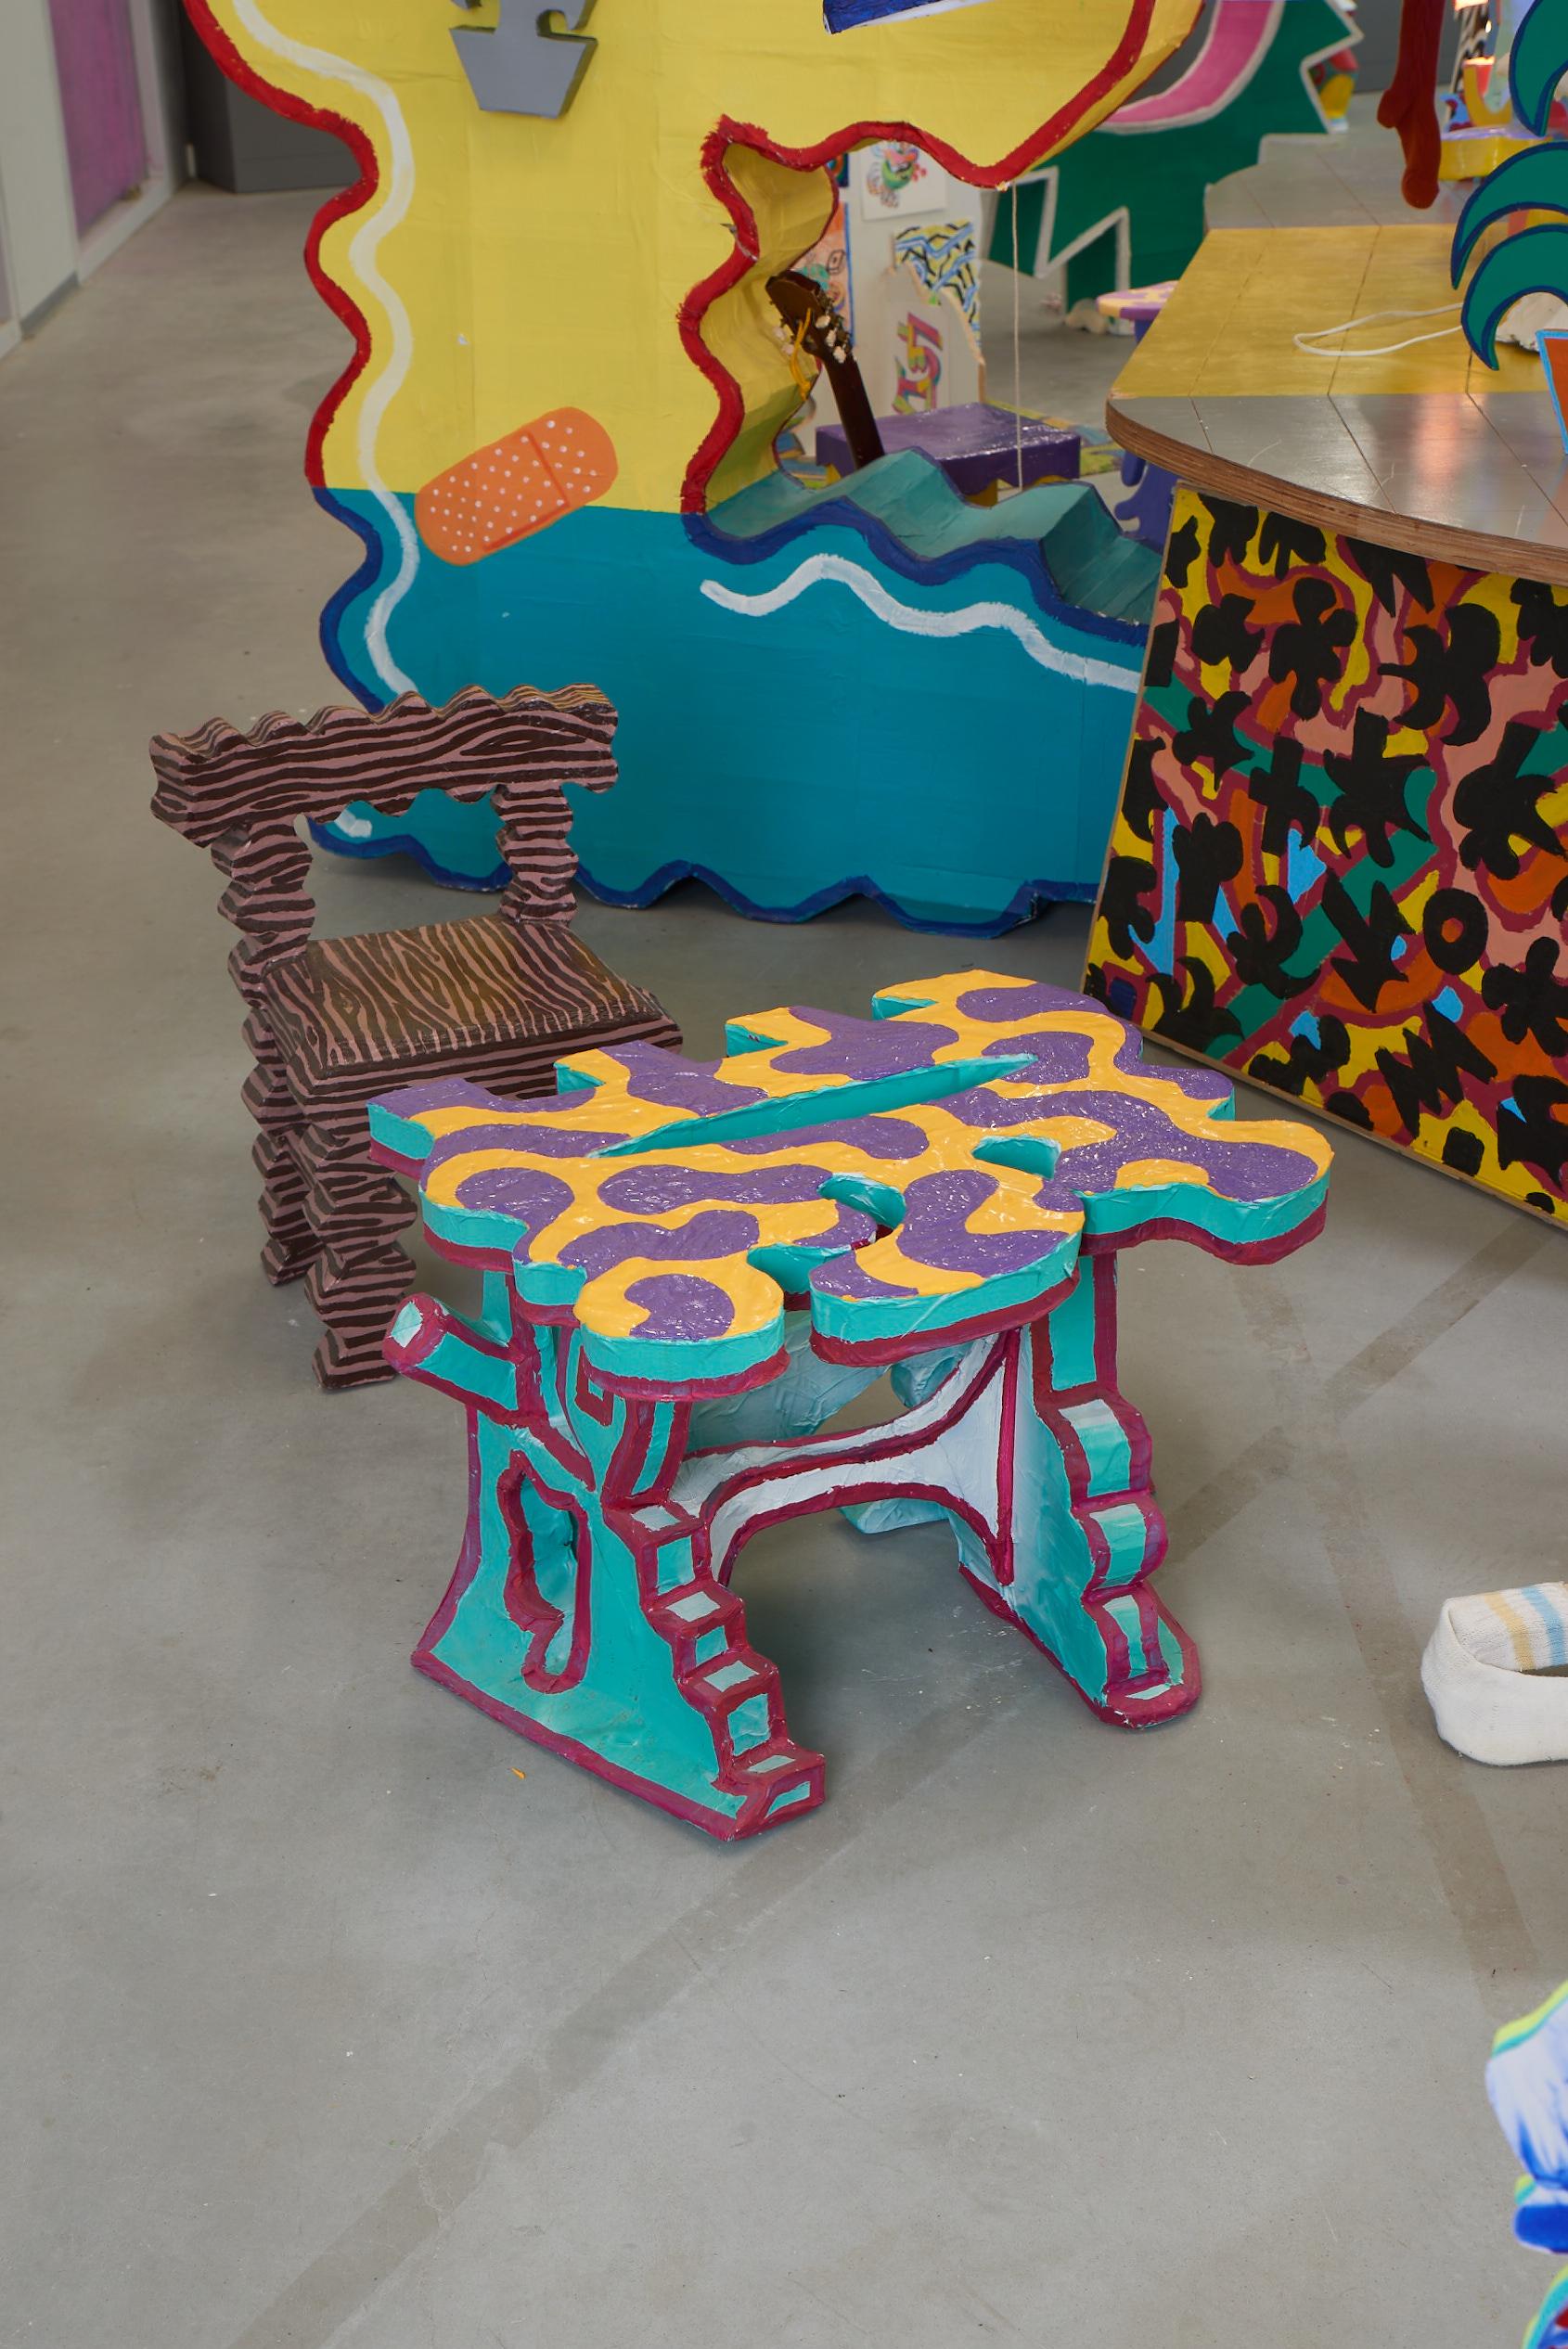 Transported from another era, the Psychedelic coffee table emerges as a captivating centerpiece in your living room. Its eccentric design and vibrant colors will infuse your days with enchantment. 

While the table boasts functionality and